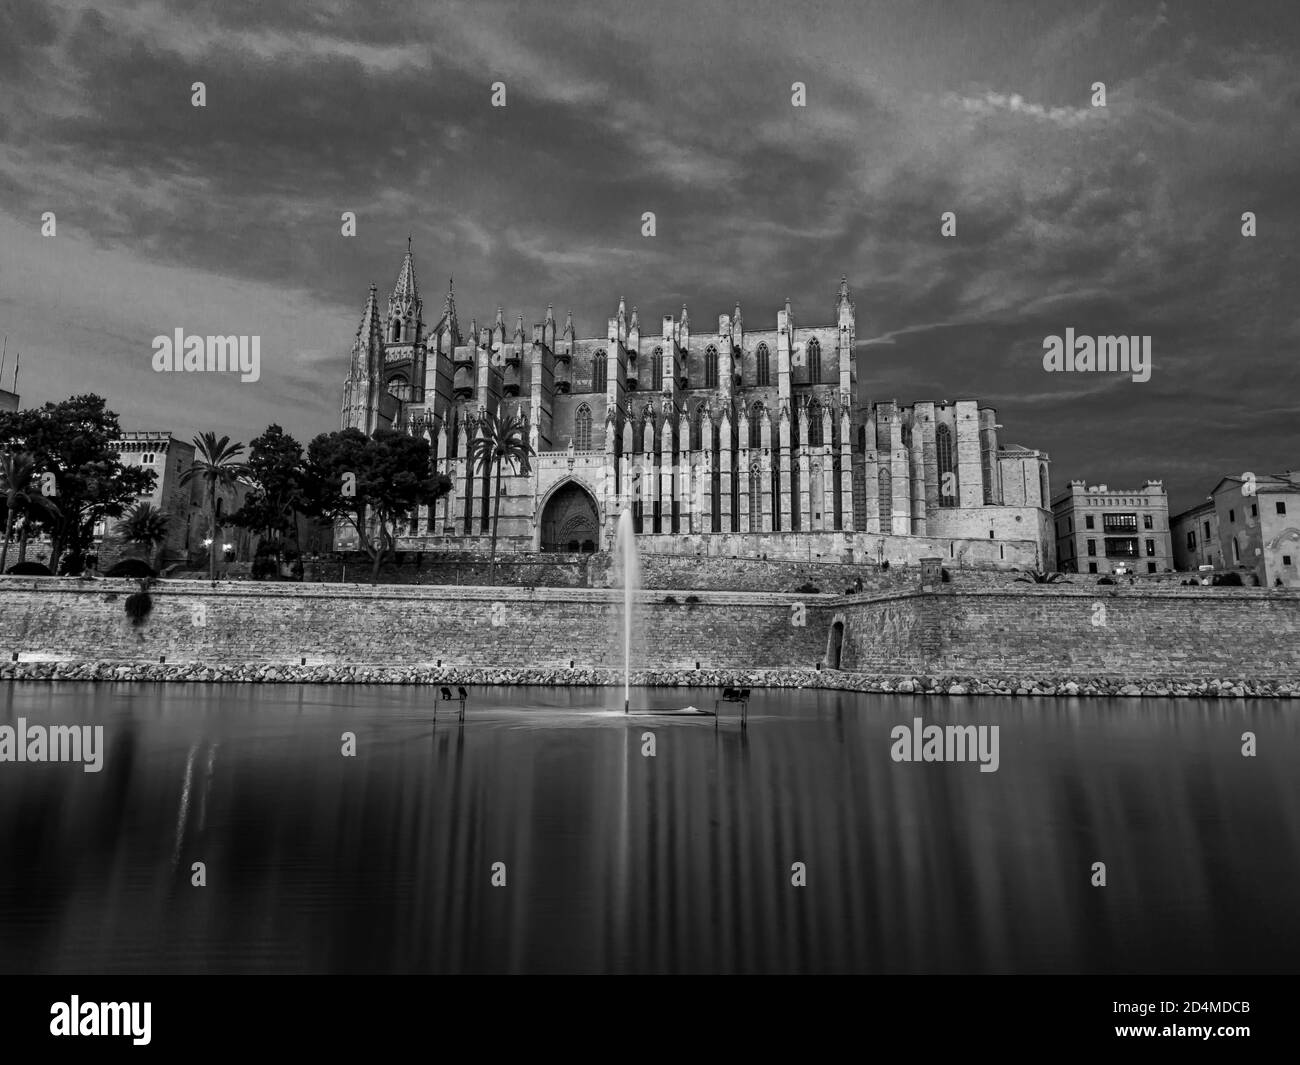 Nice black and white image of the cathedral of Palma de Mallorca, Spain, reflecting in the Parque del Mar. Stock Photo